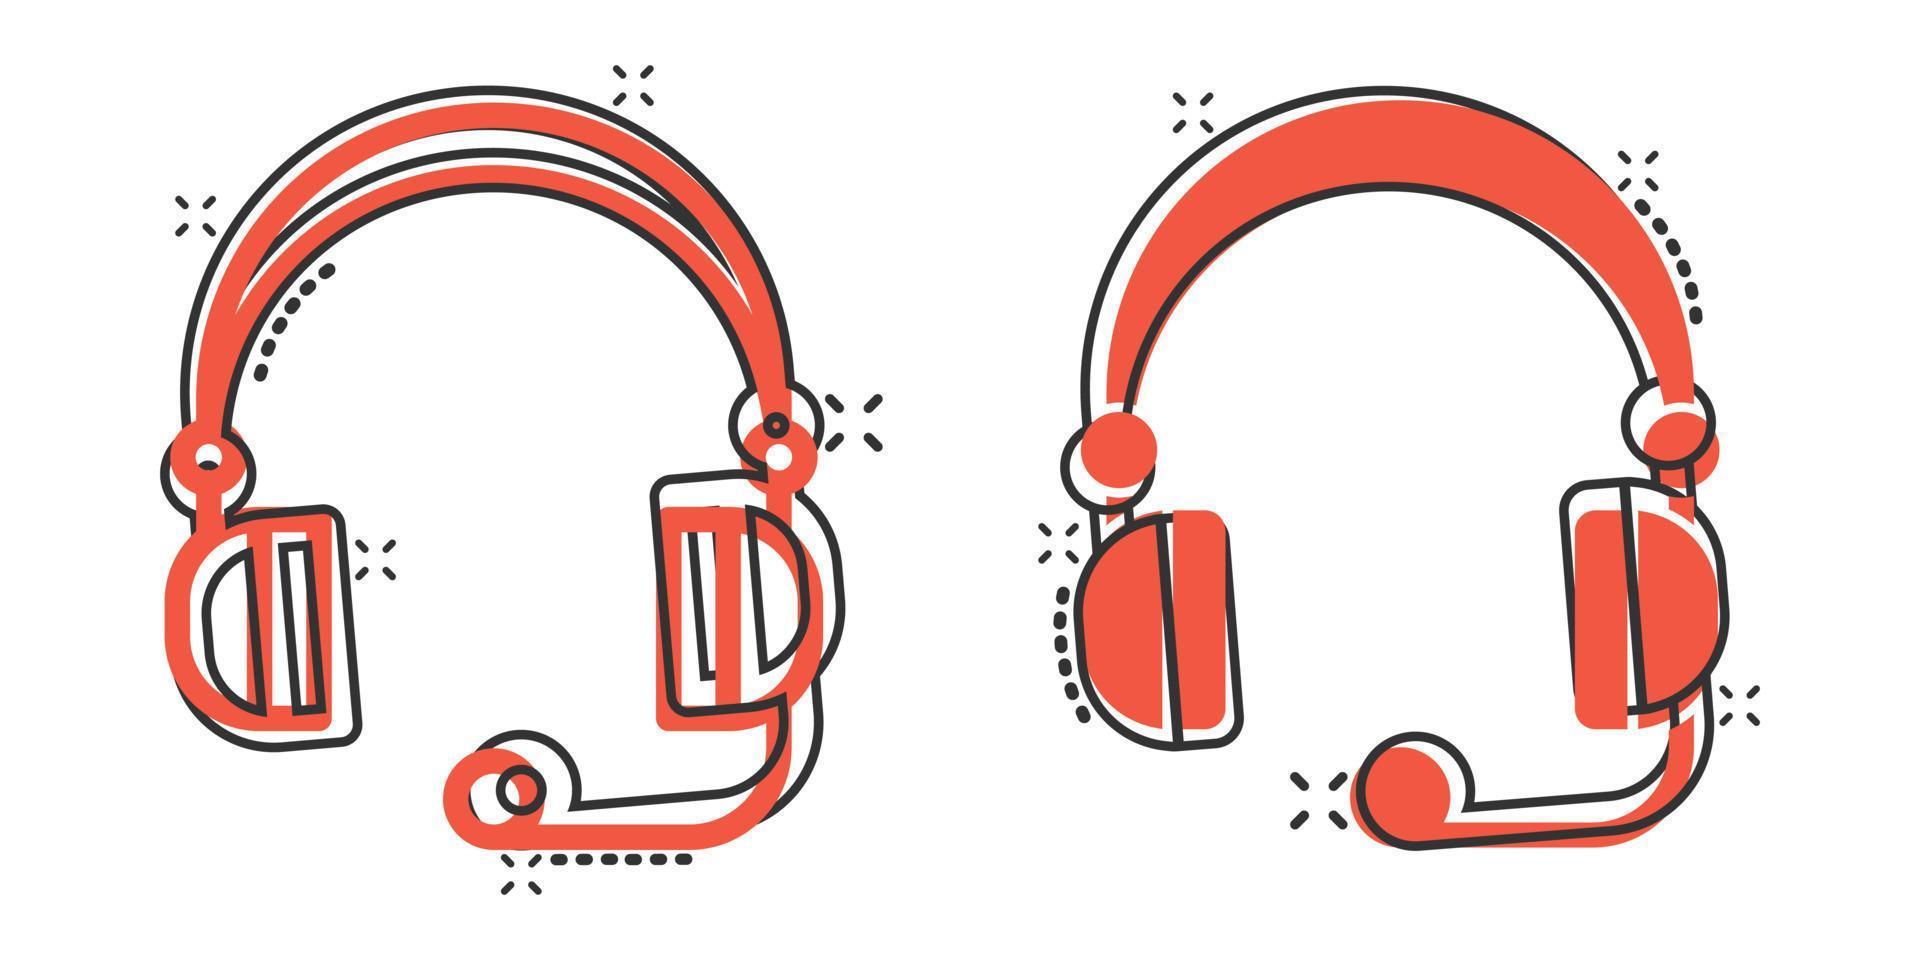 Helpdesk icon in comic style. Headphone cartoon vector illustration on white isolated background. Chat operator splash effect business concept.